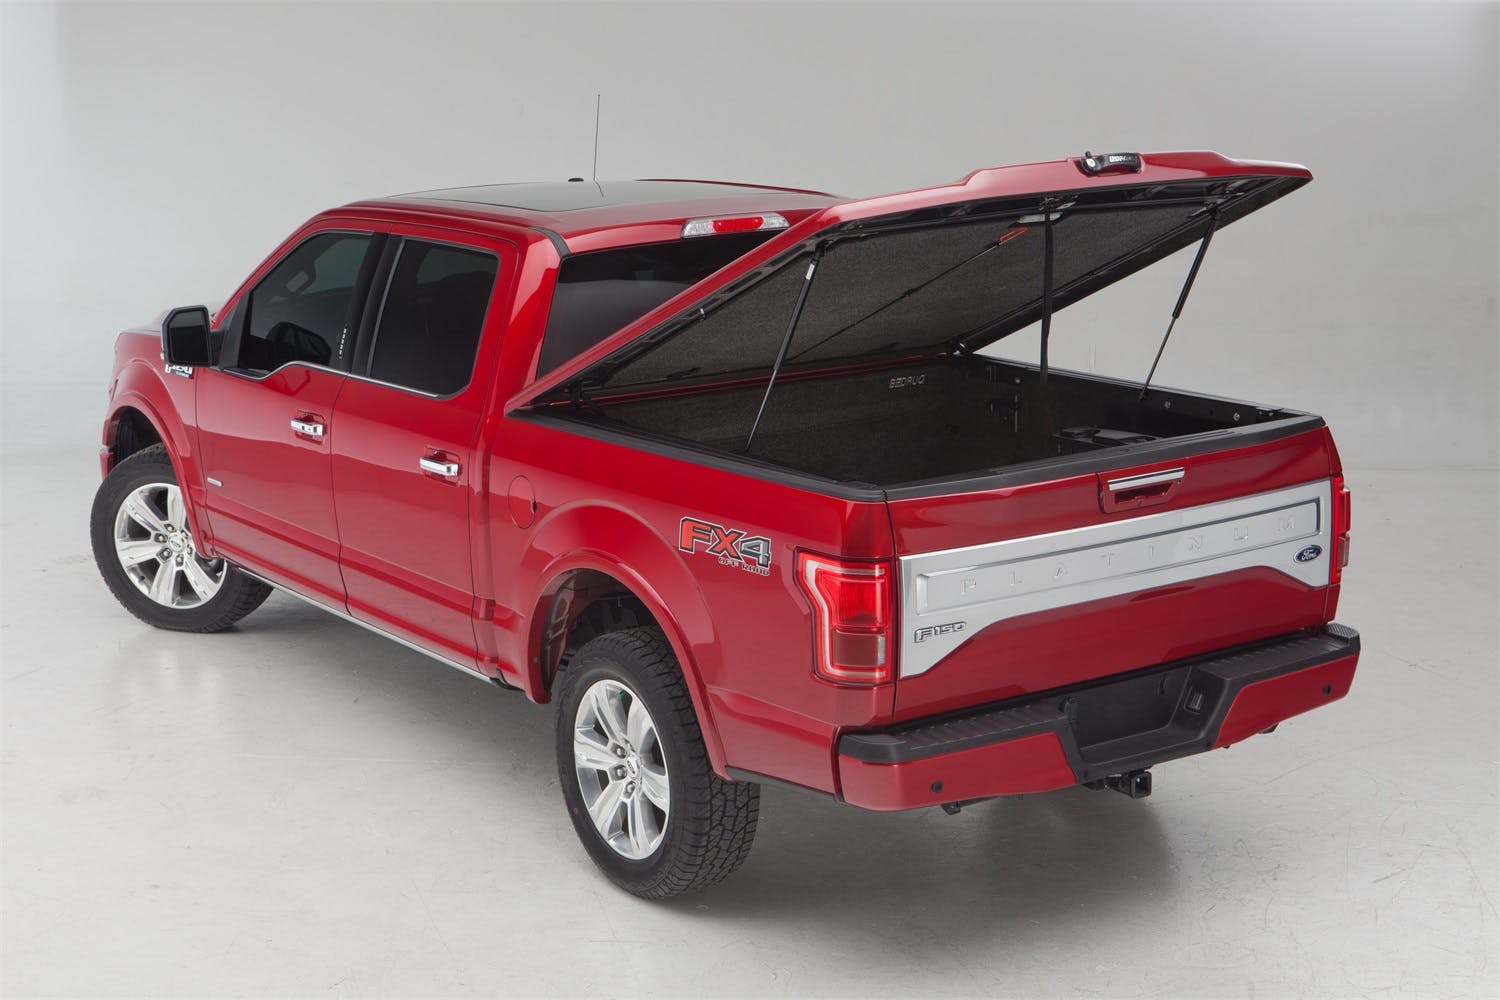 UnderCover UC1118L-G7C Elite LX Tonneau Cover, Pull Me Over Red